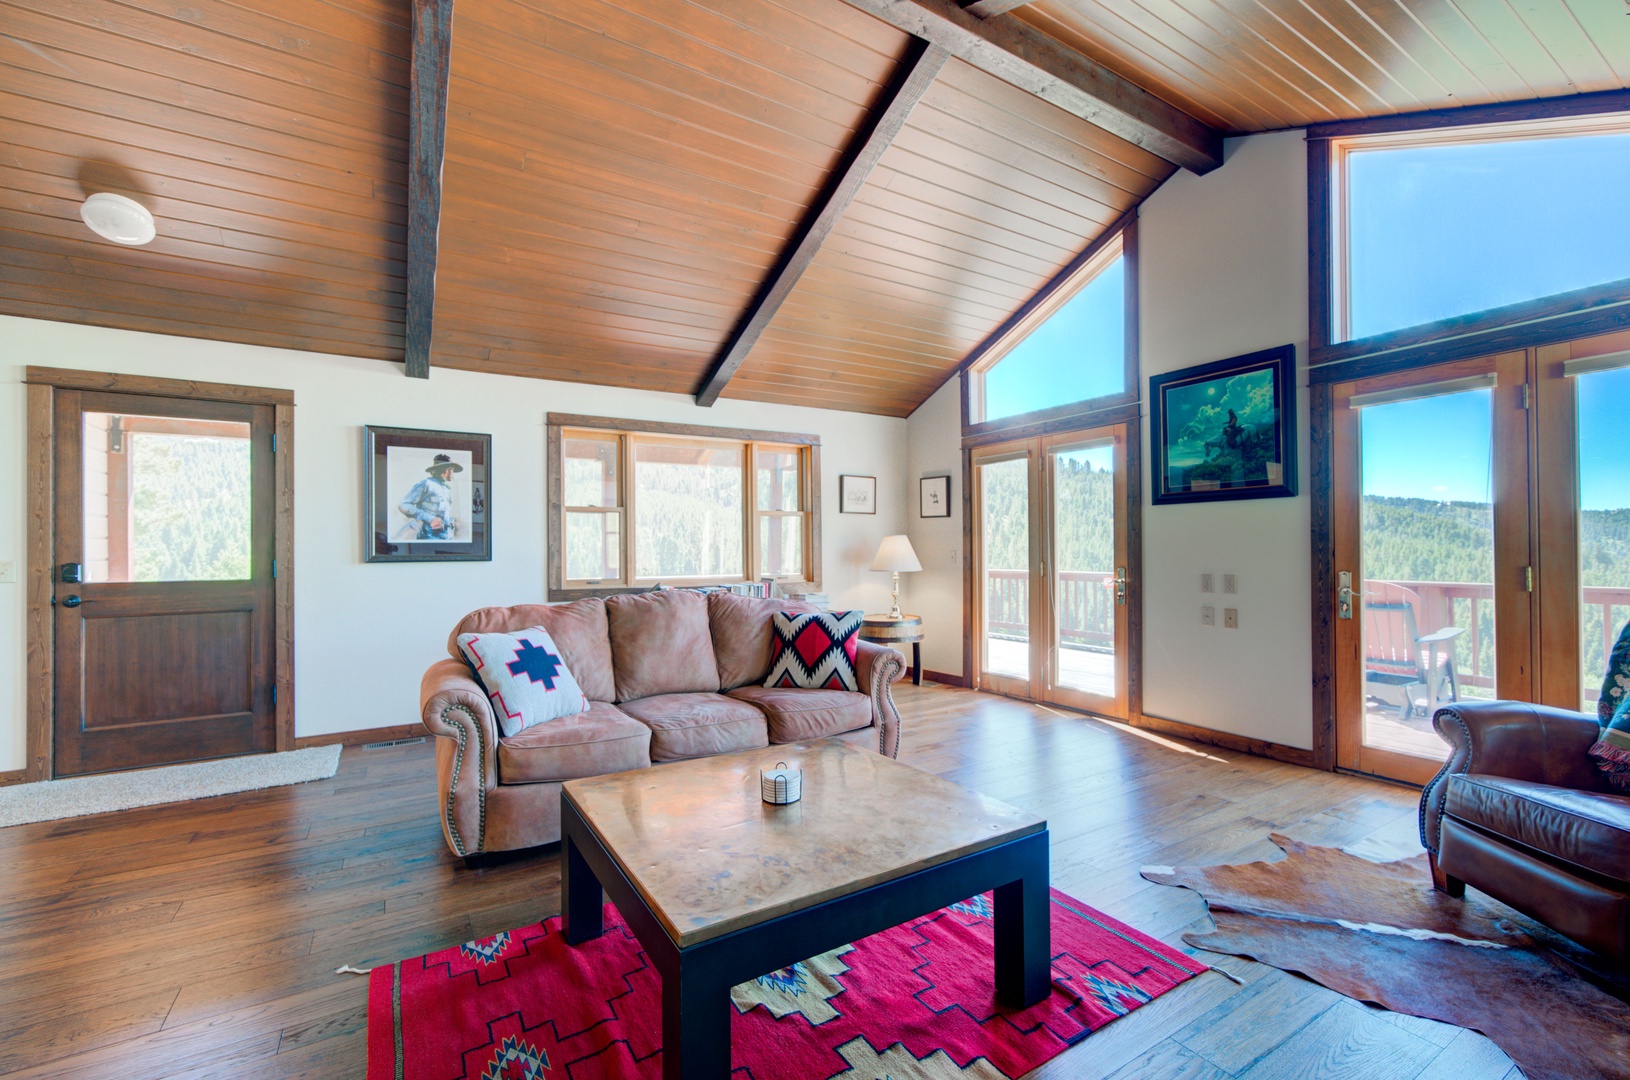 Bozeman Vacation Rentals, The Canyon Lookout - Floor to ceiling windows!